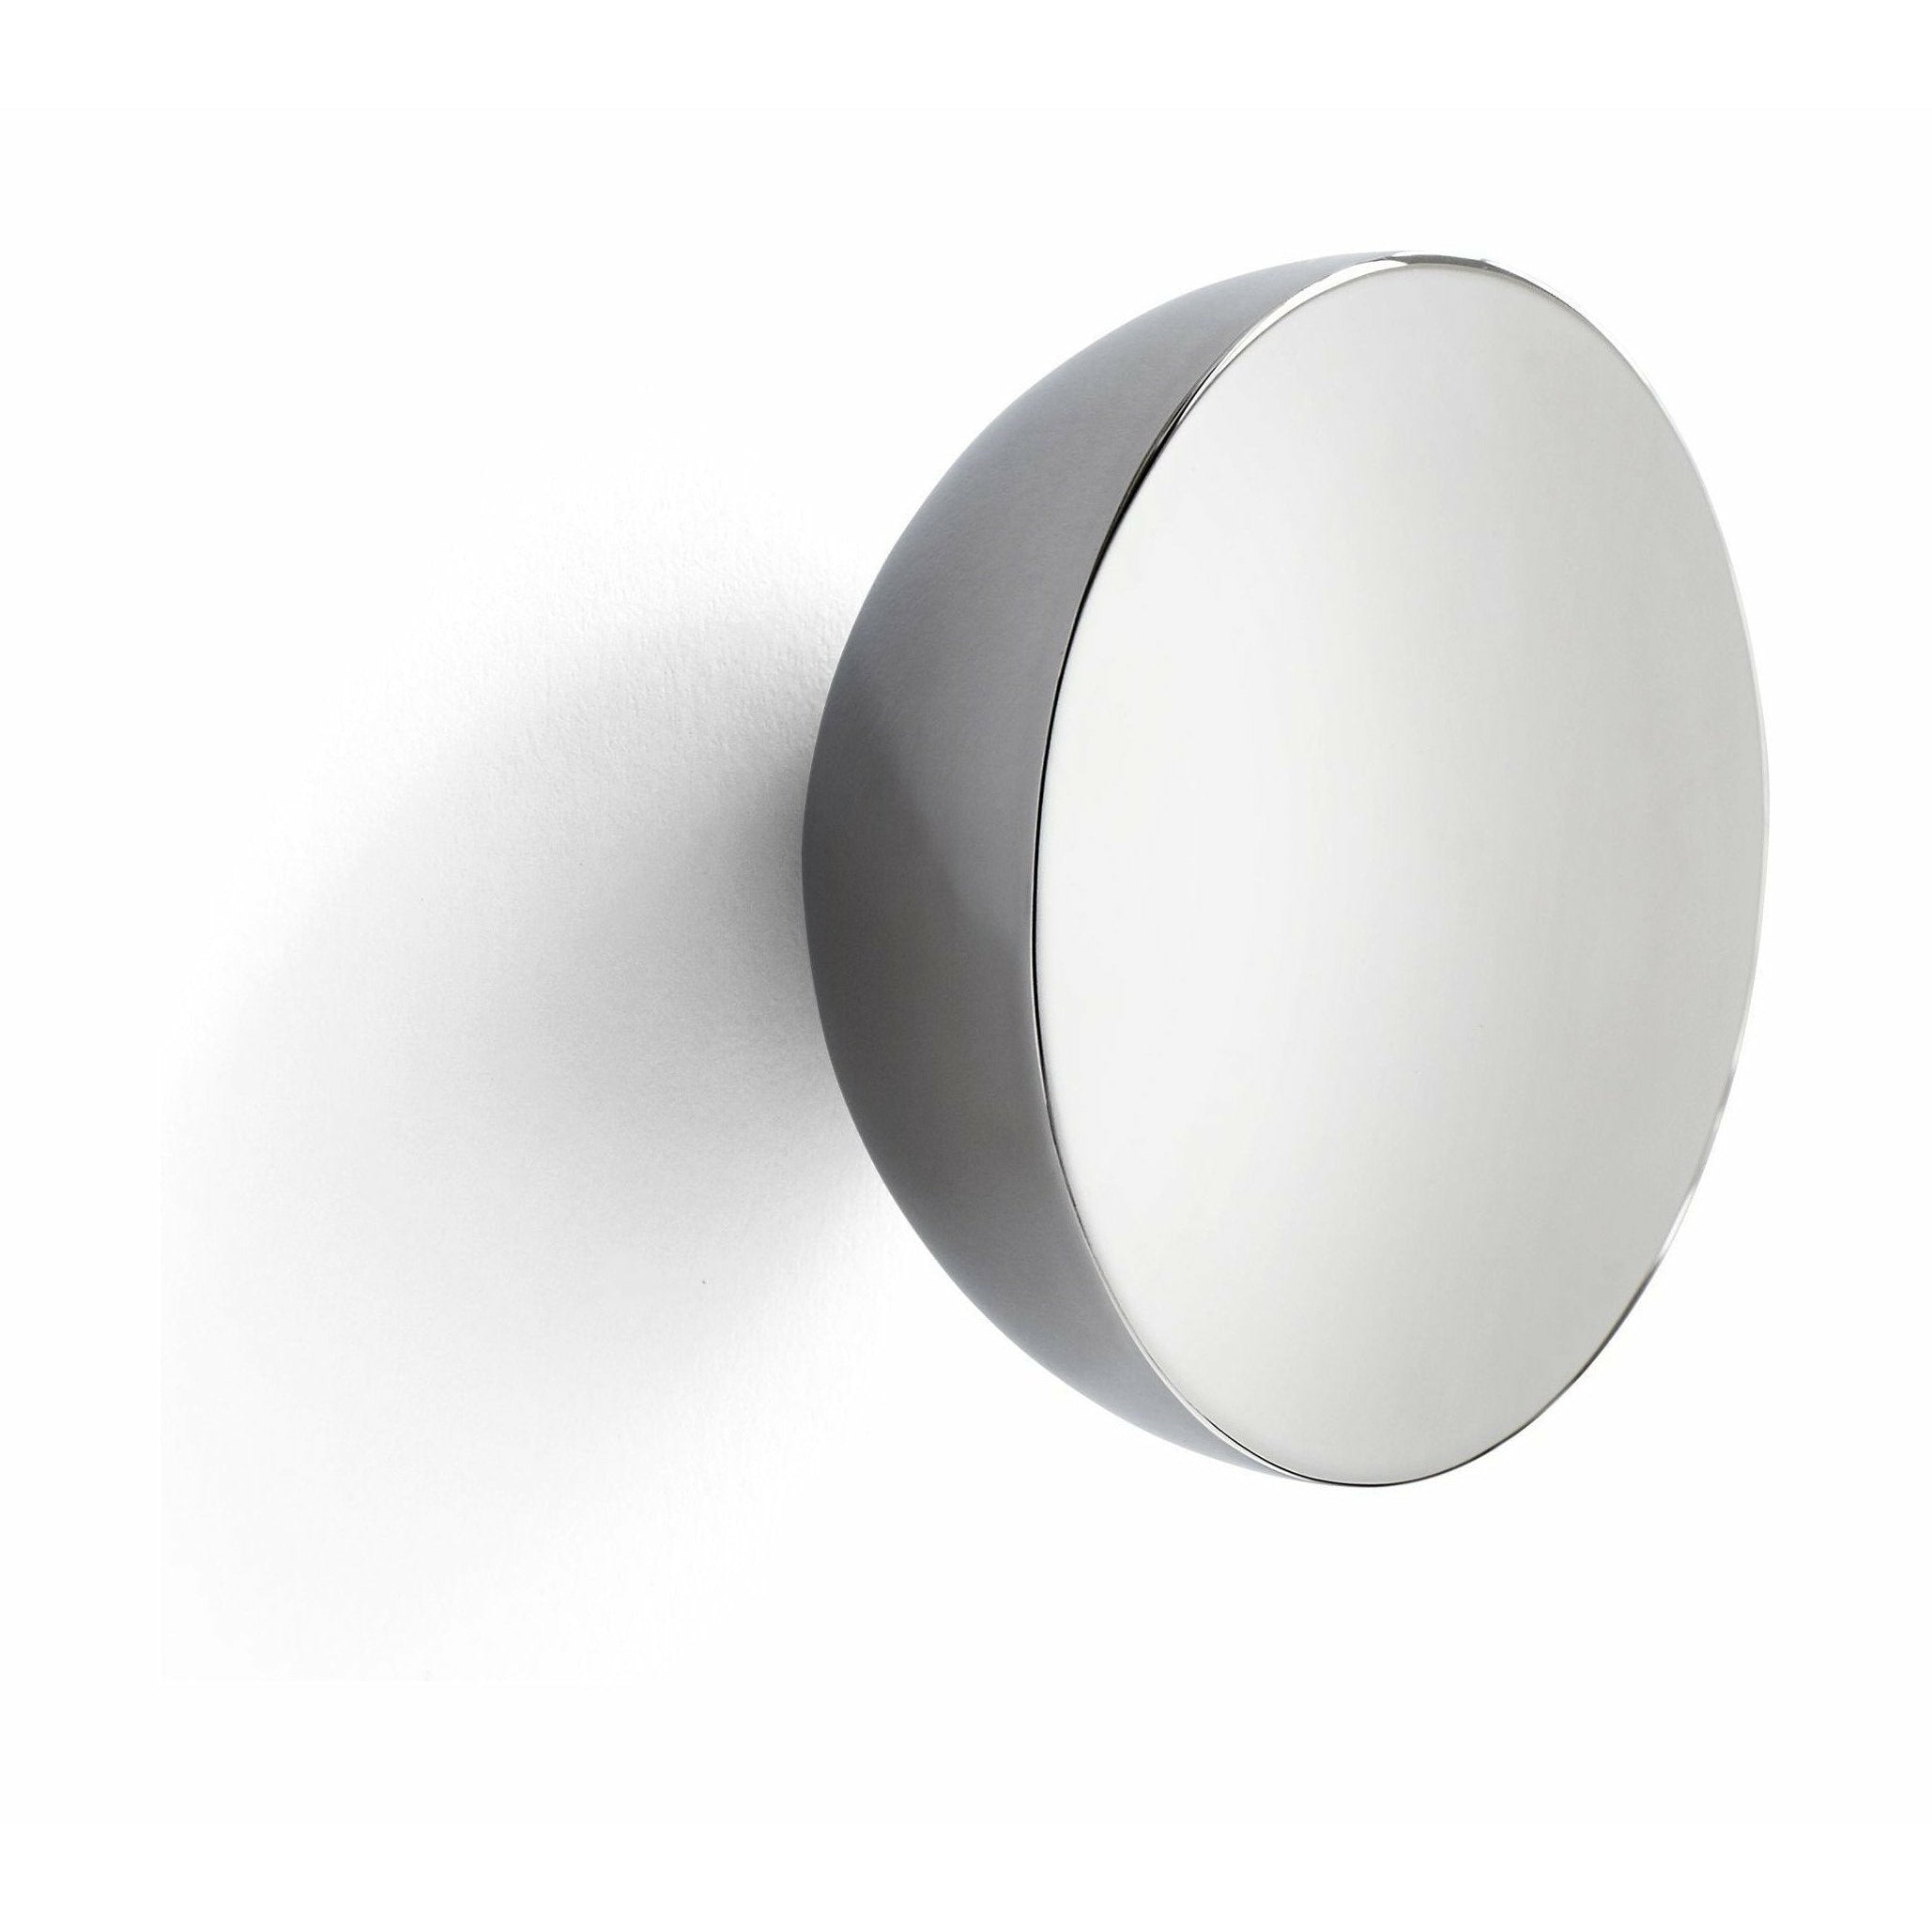 New Works Aura Wall Mirror, Large